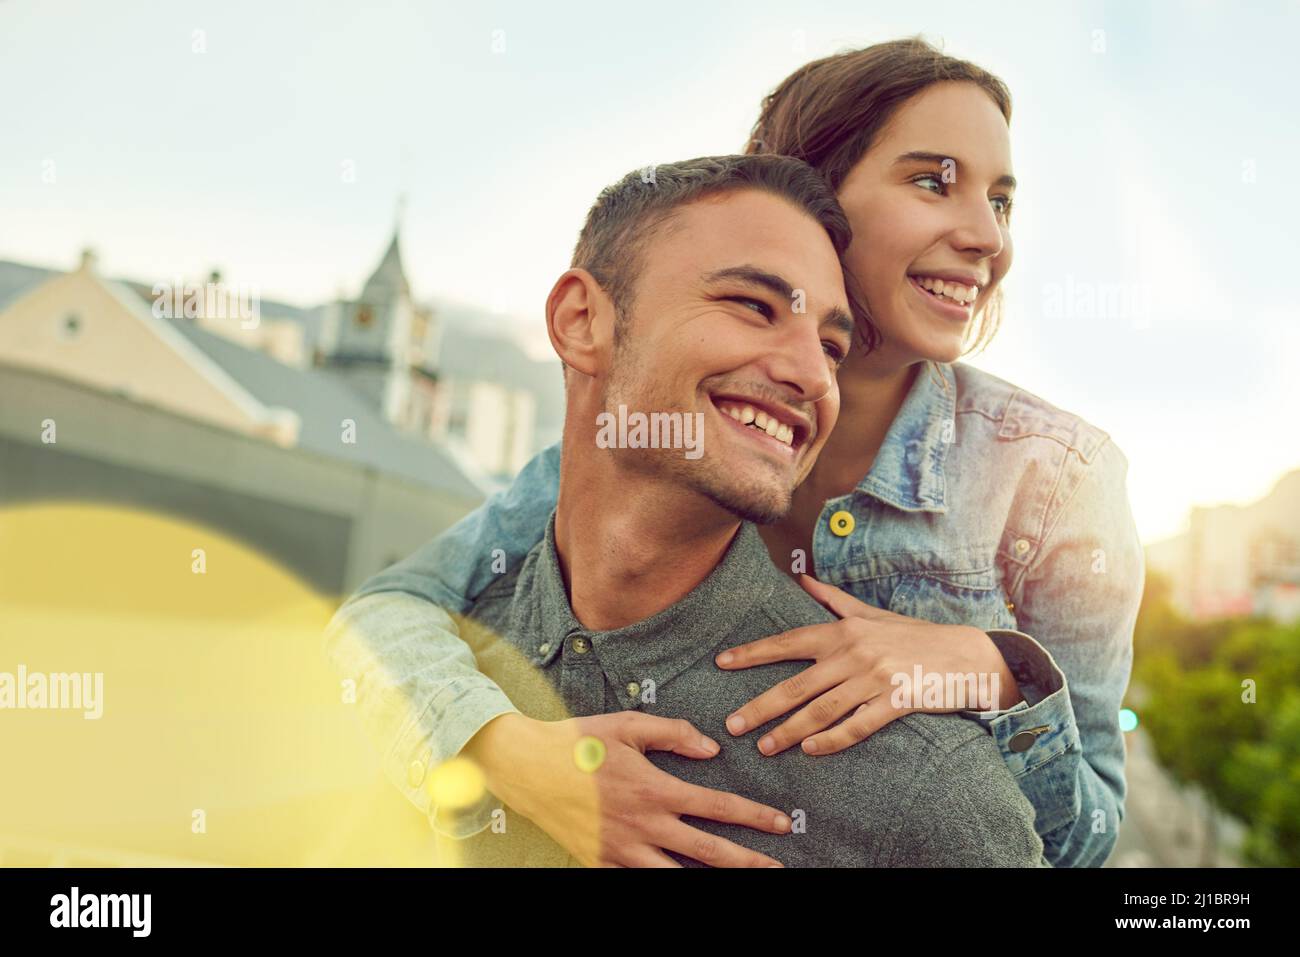 Love makes time for fun. Shot of a happy young couple enjoying a piggyback ride in the city. Stock Photo